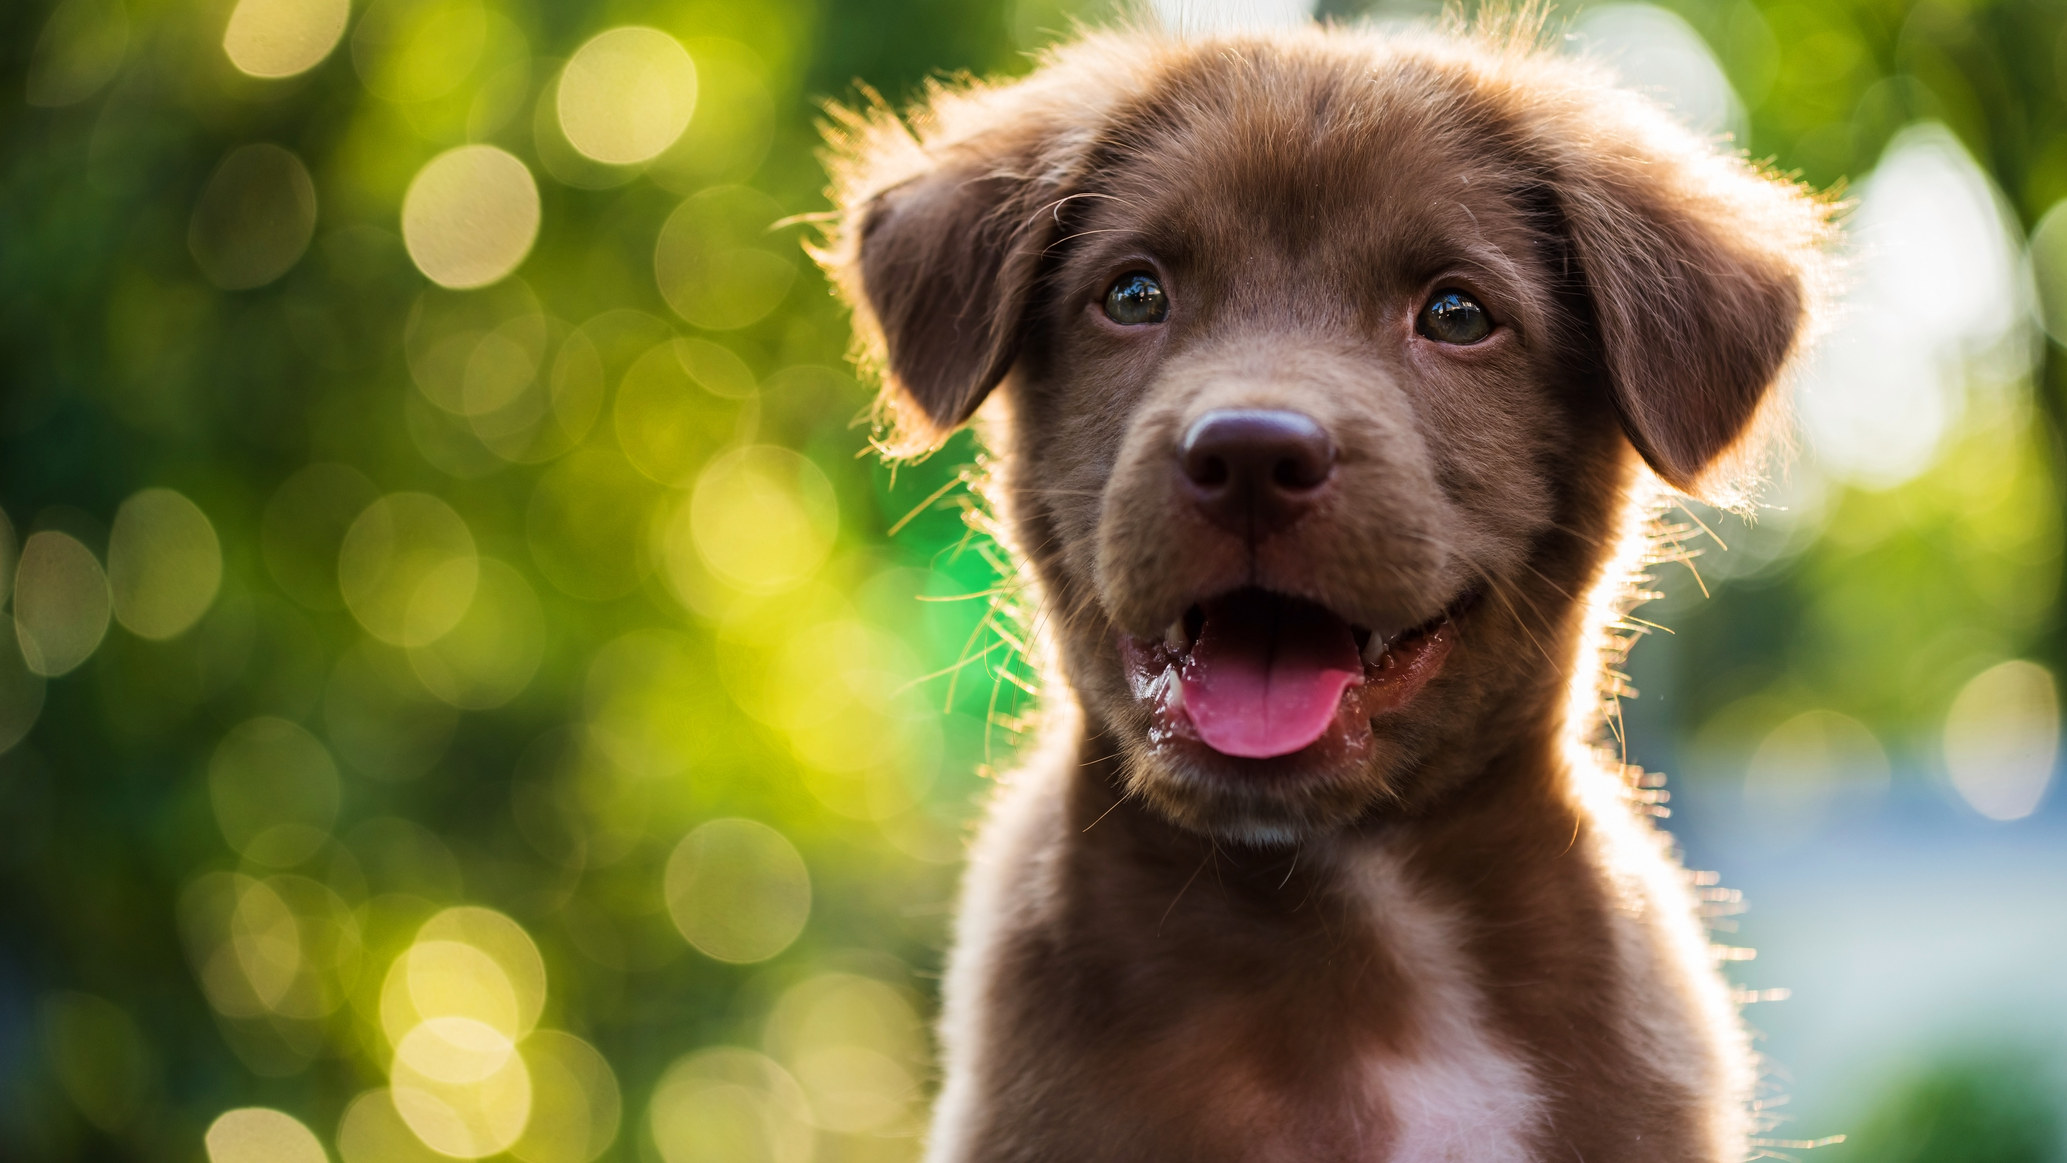 Health Issues To Watch Out For In 25 Popular Dog Breeds [Infographic]